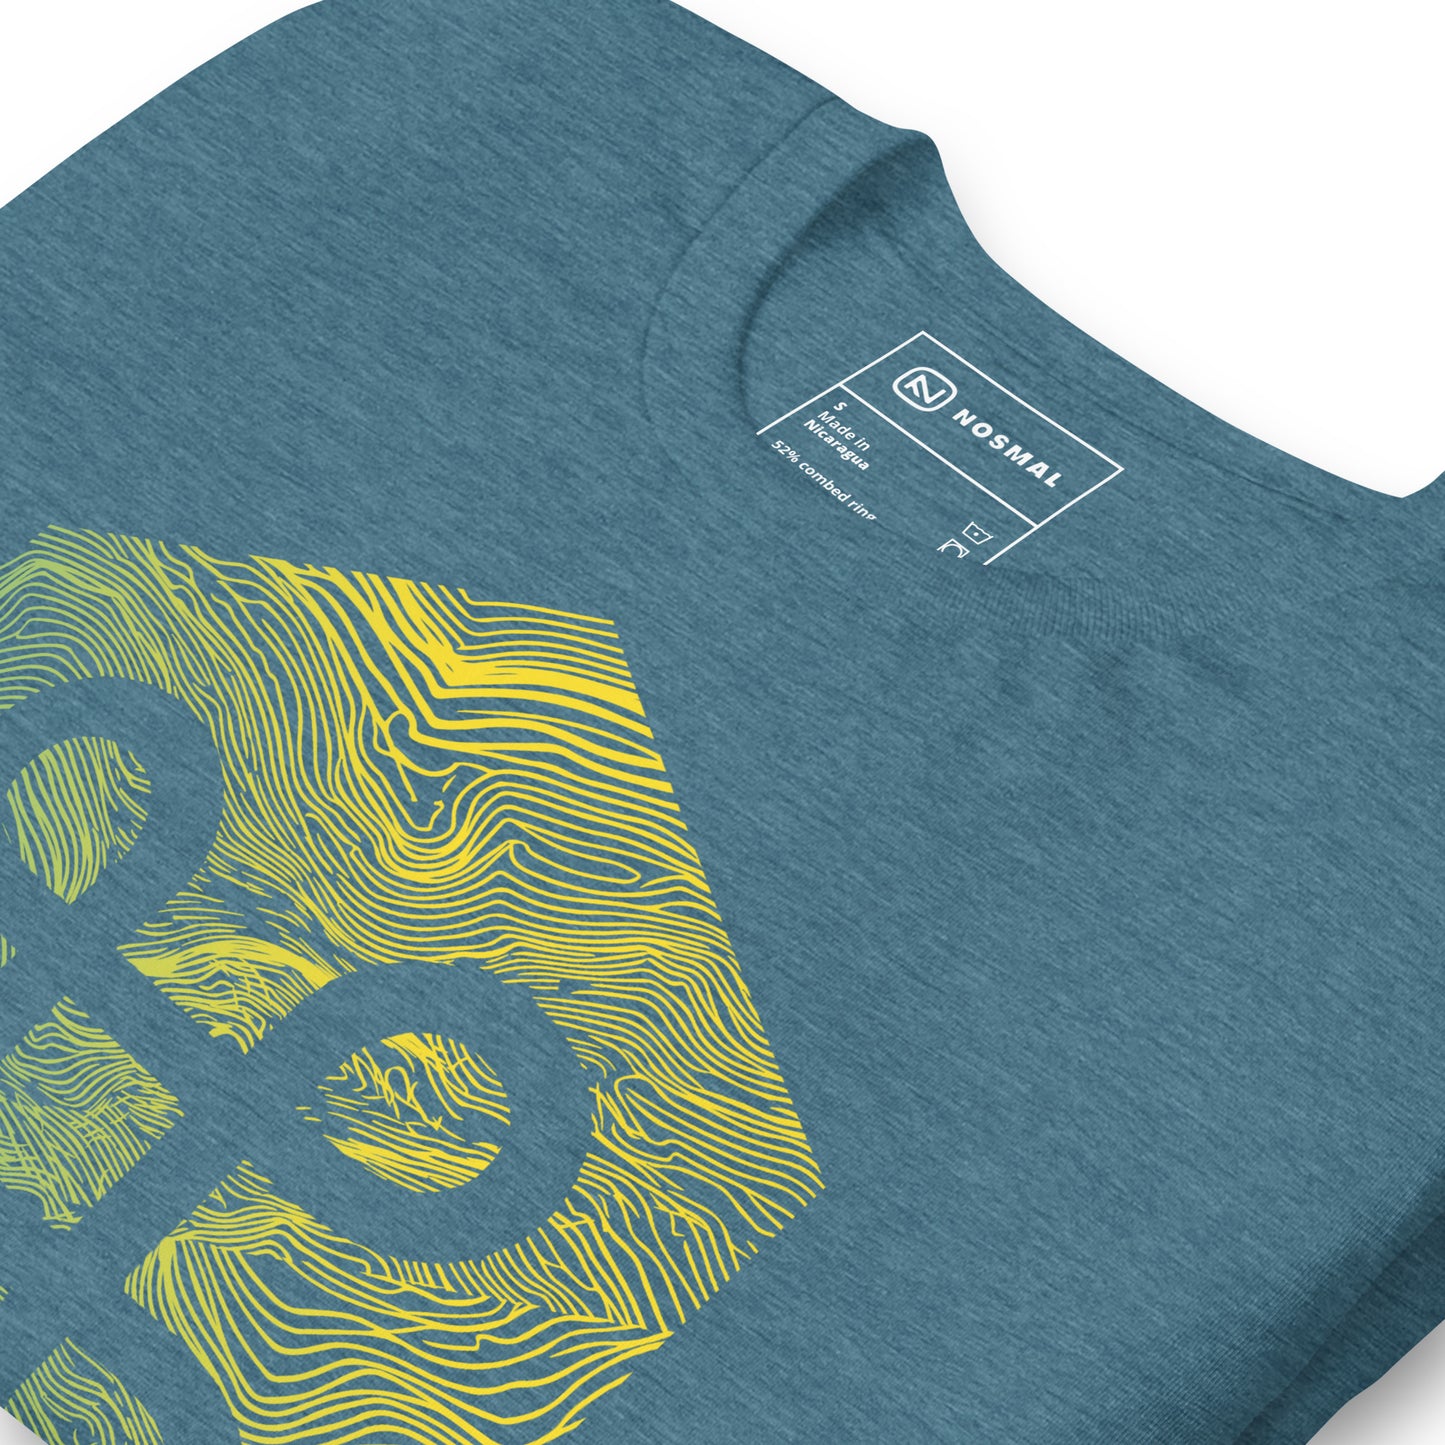 Angled close up shot of the commander gradient design on heather deep teal unisex t-shirt.